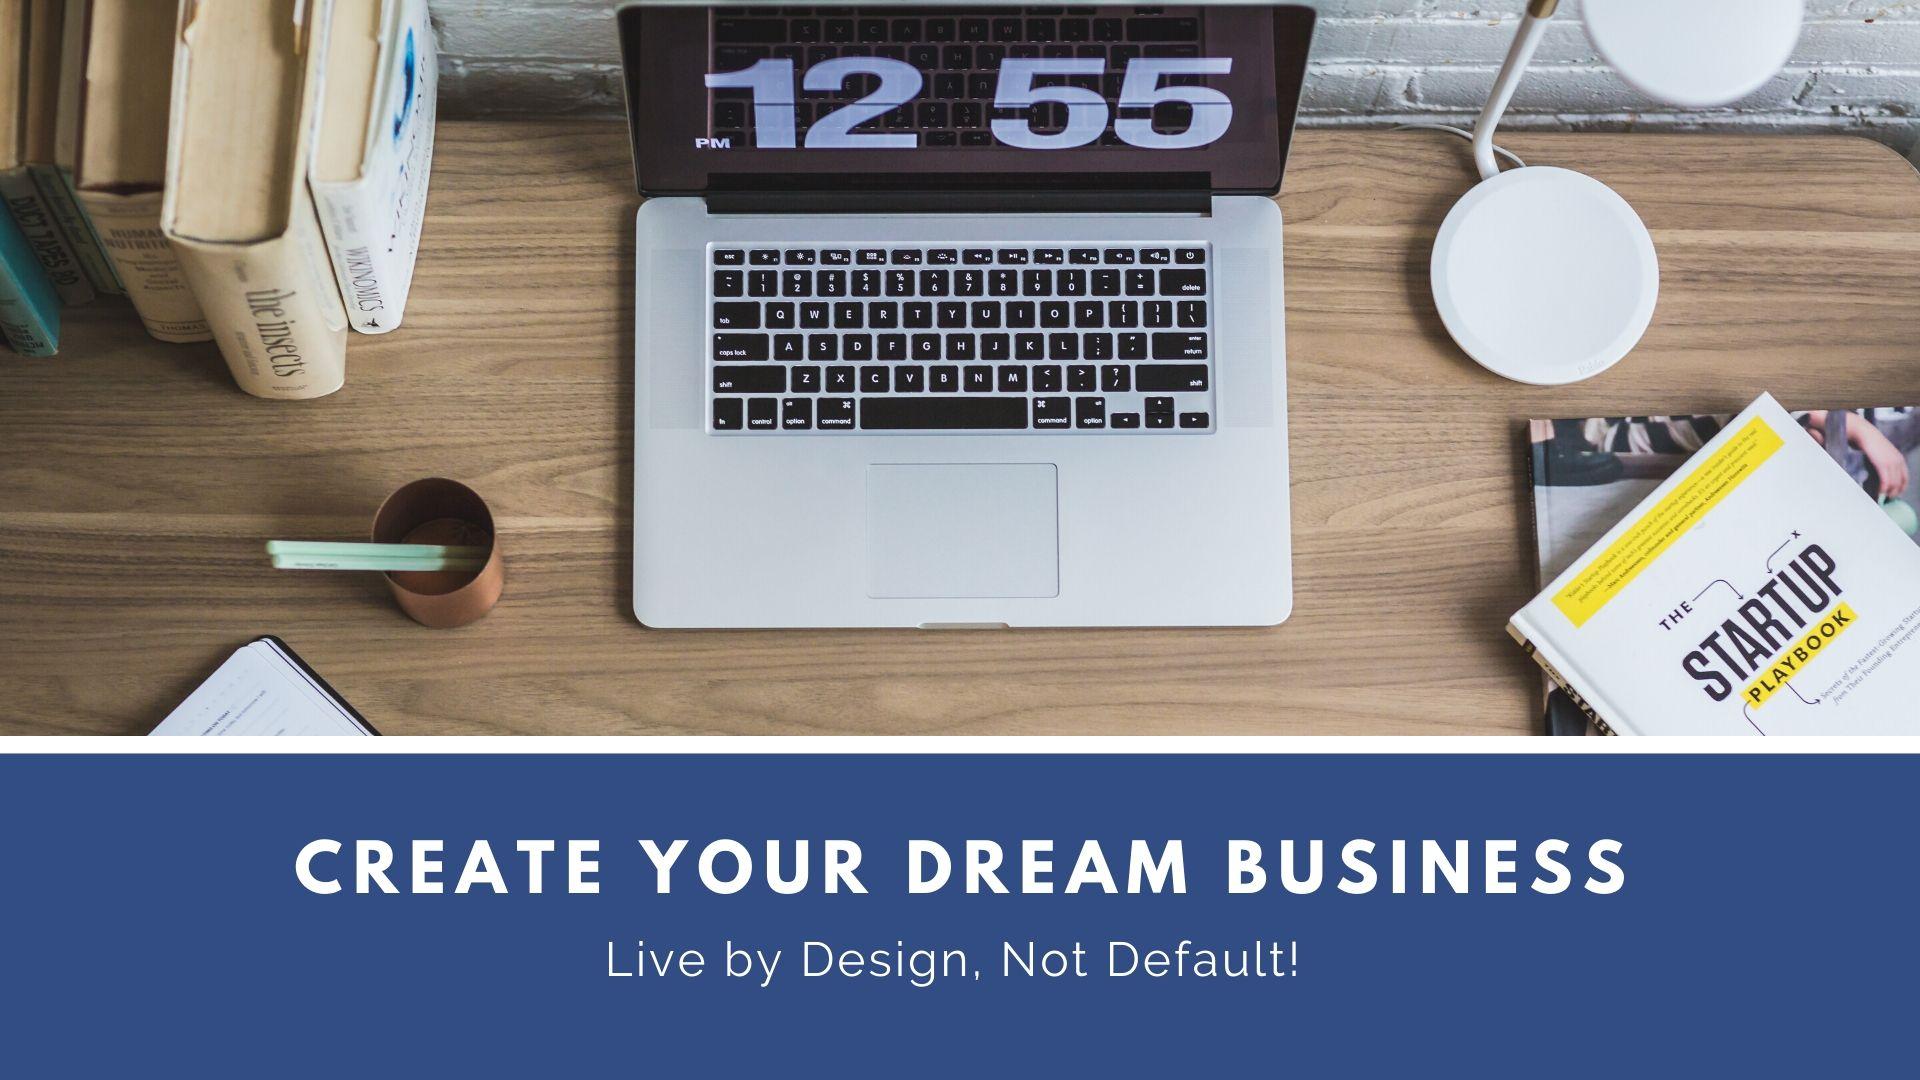 Create Your Dream Business!